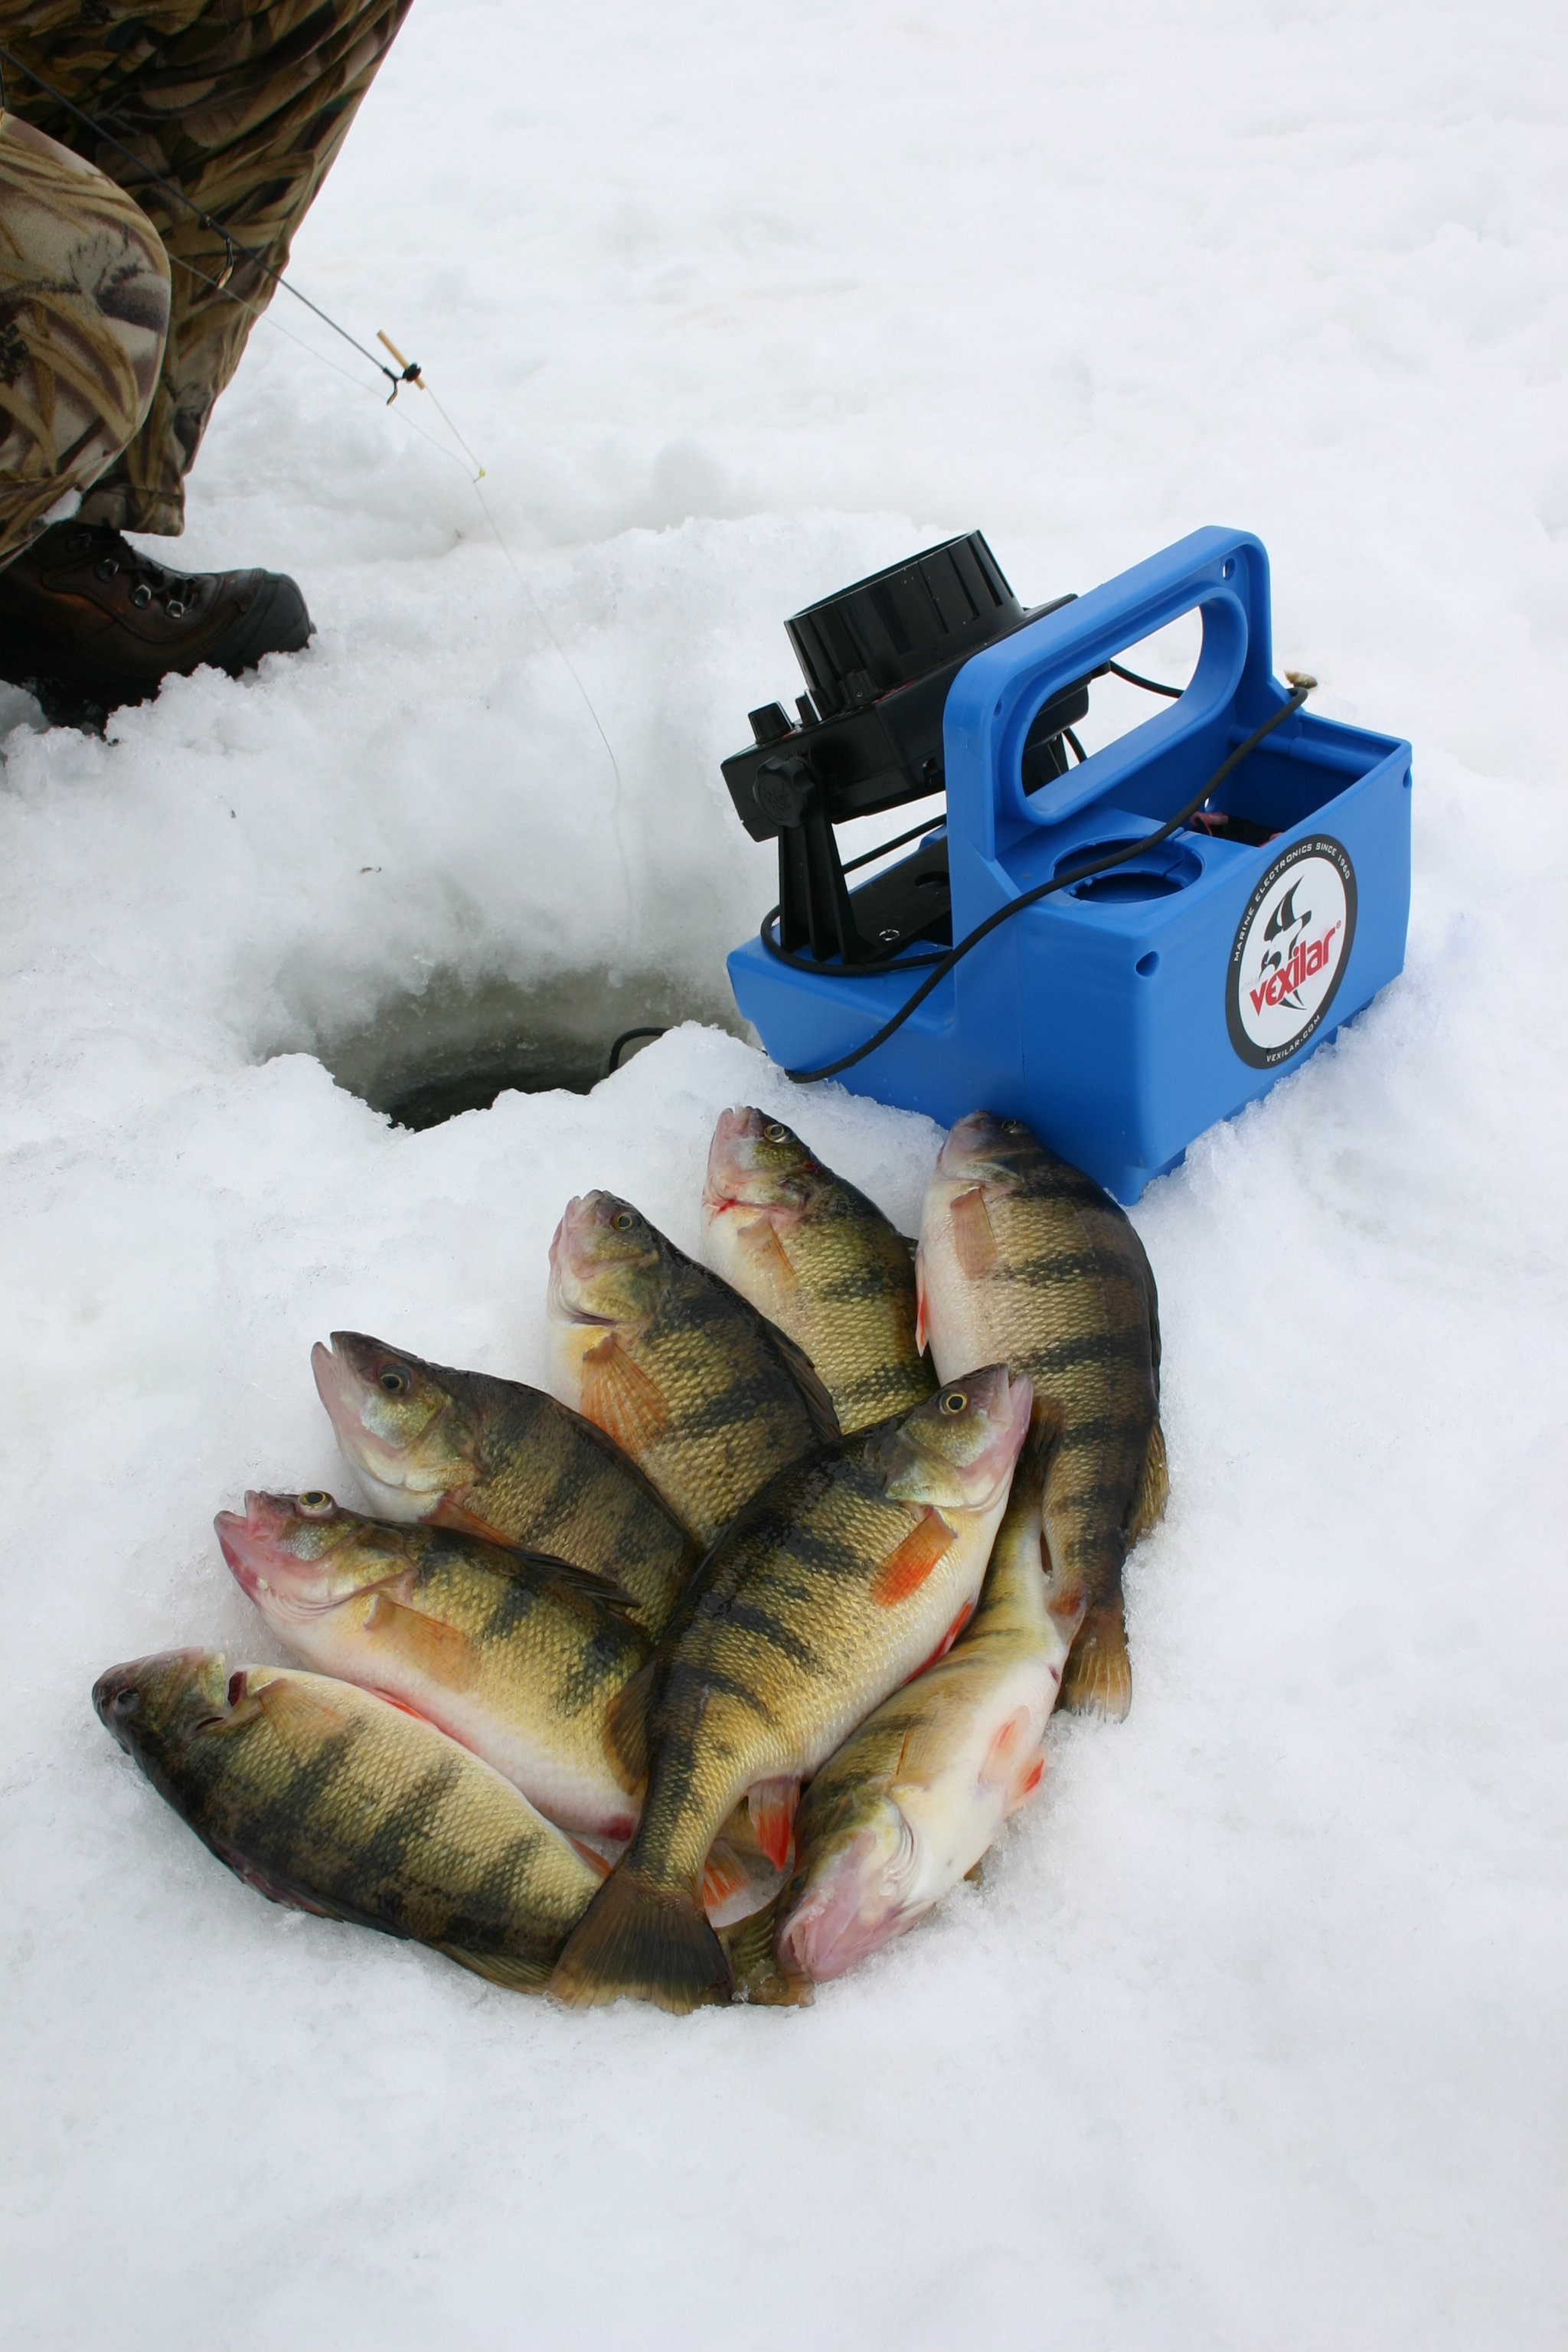 Improve Your Ice Fishing by 50%